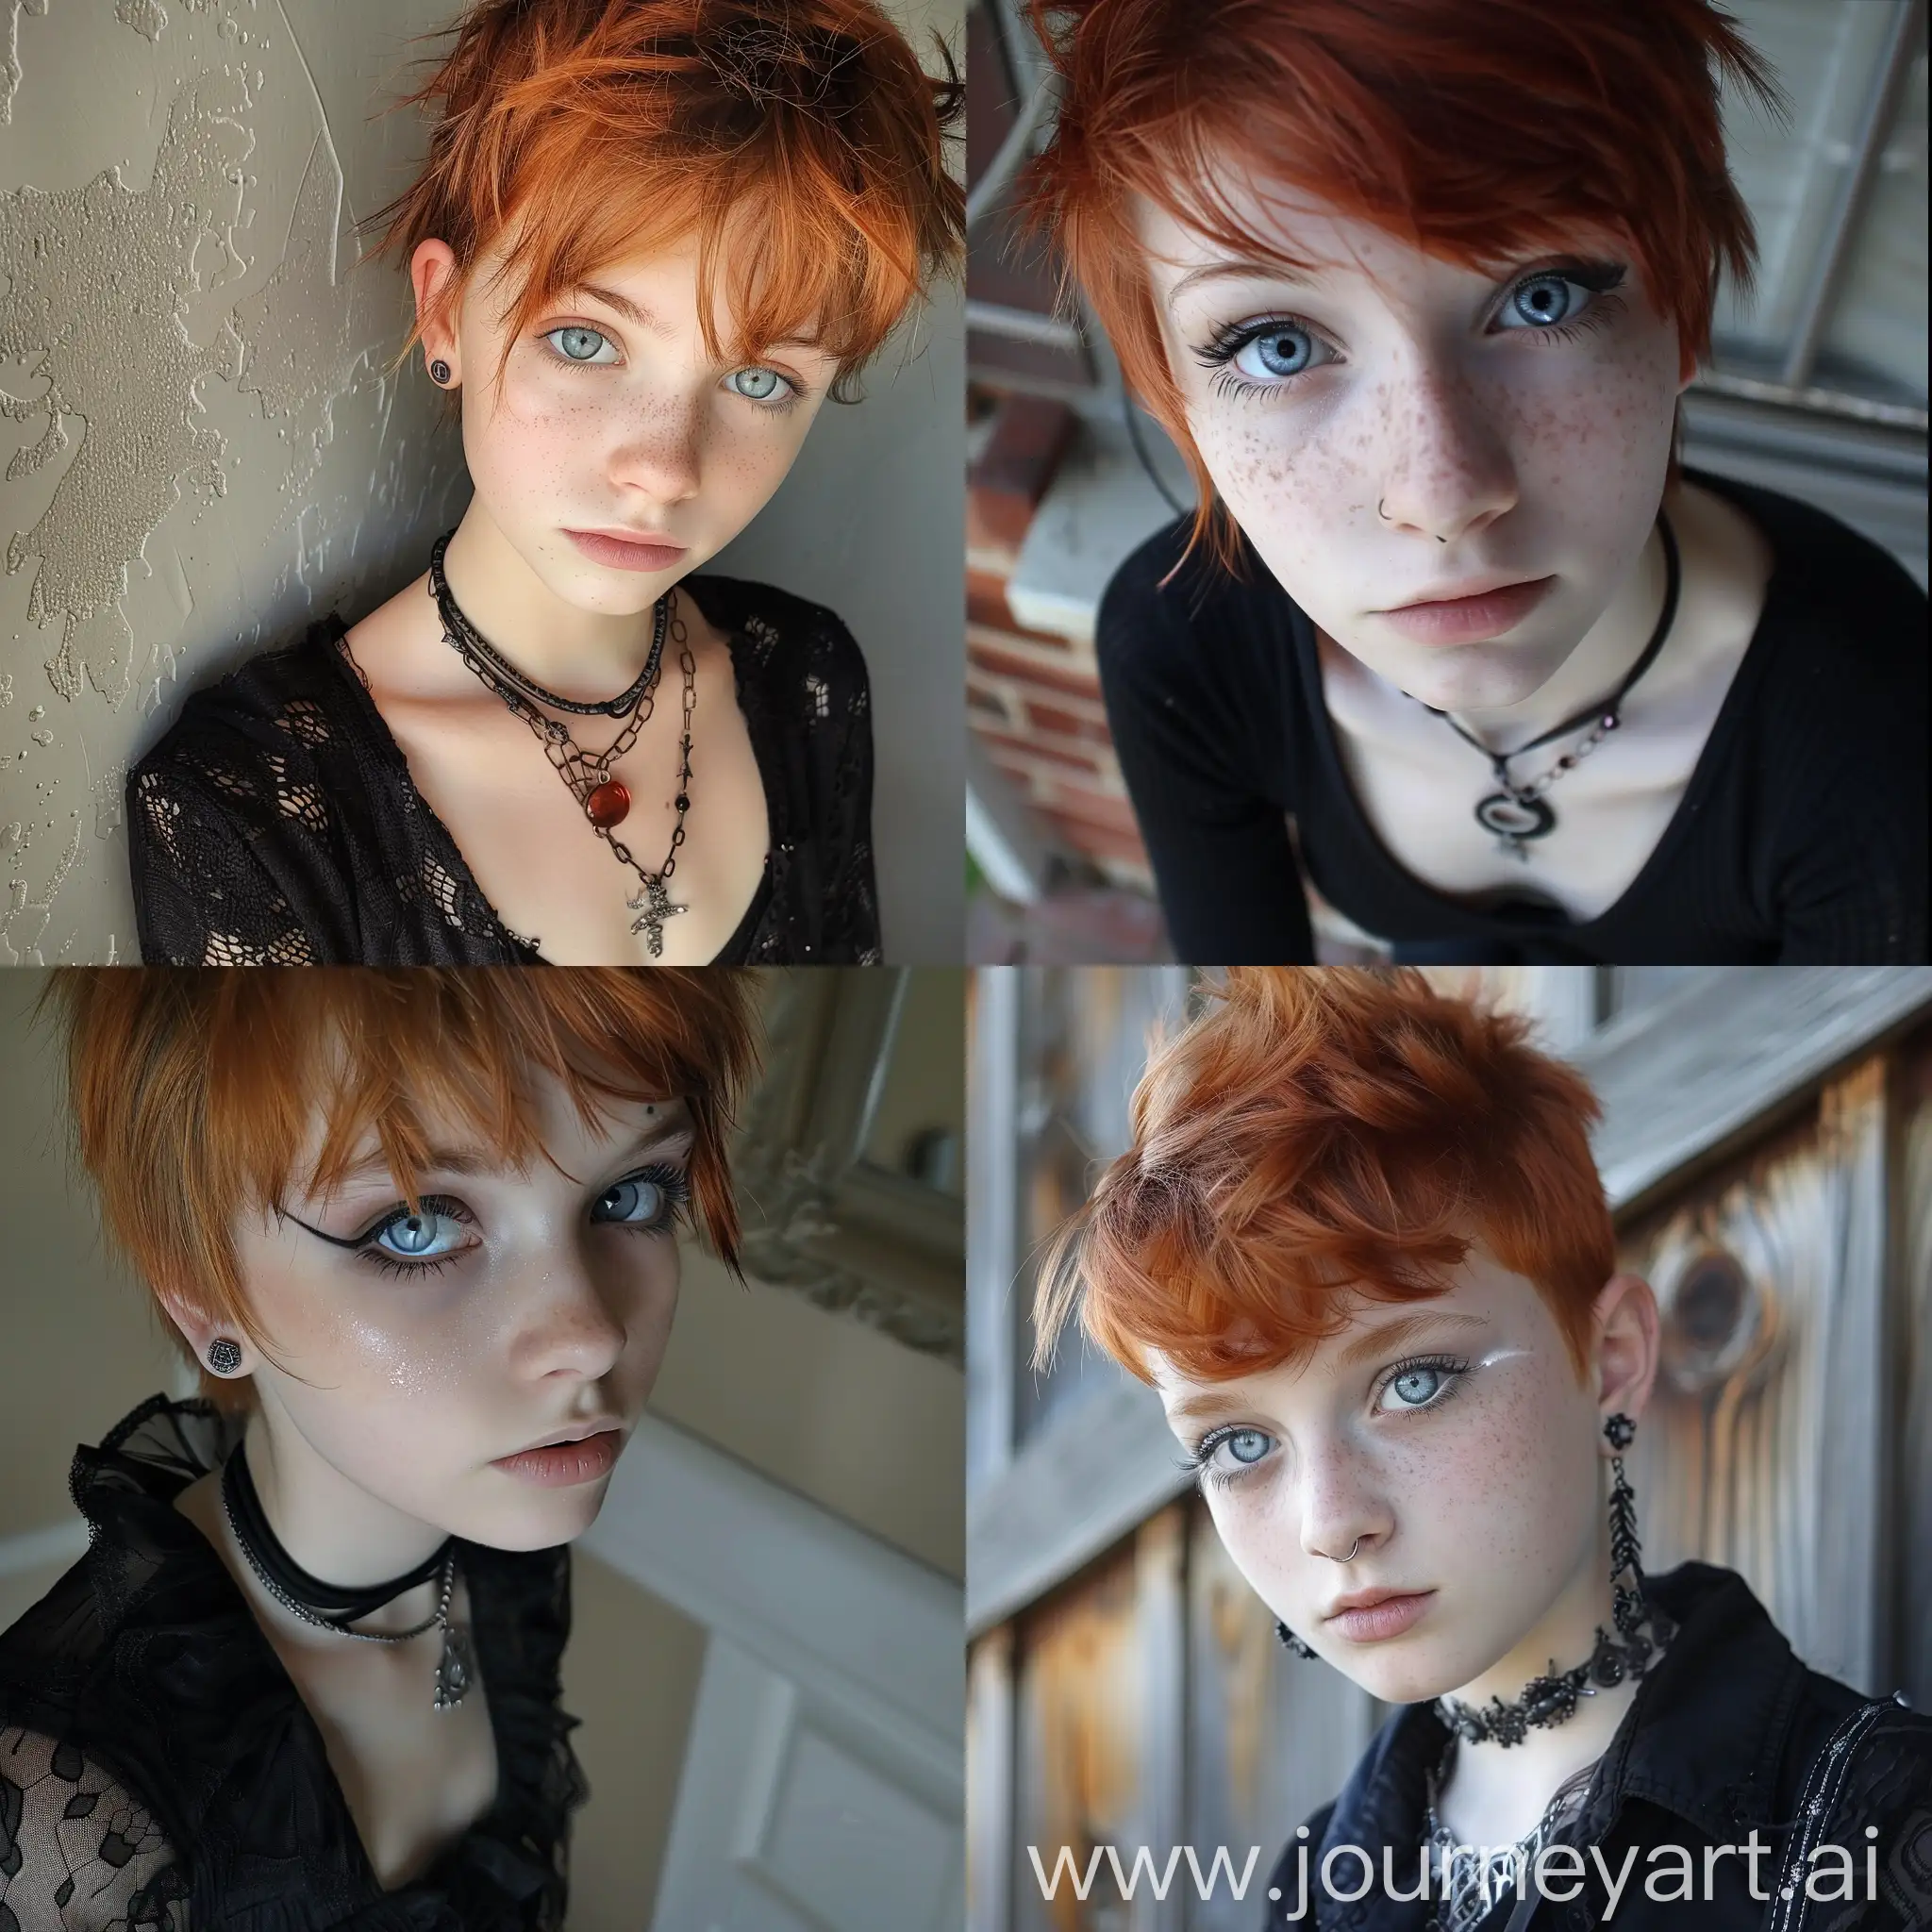 Goth-Teen-with-Pixie-Cut-Mysterious-RedHaired-Girl-with-Icy-Blue-Eyes